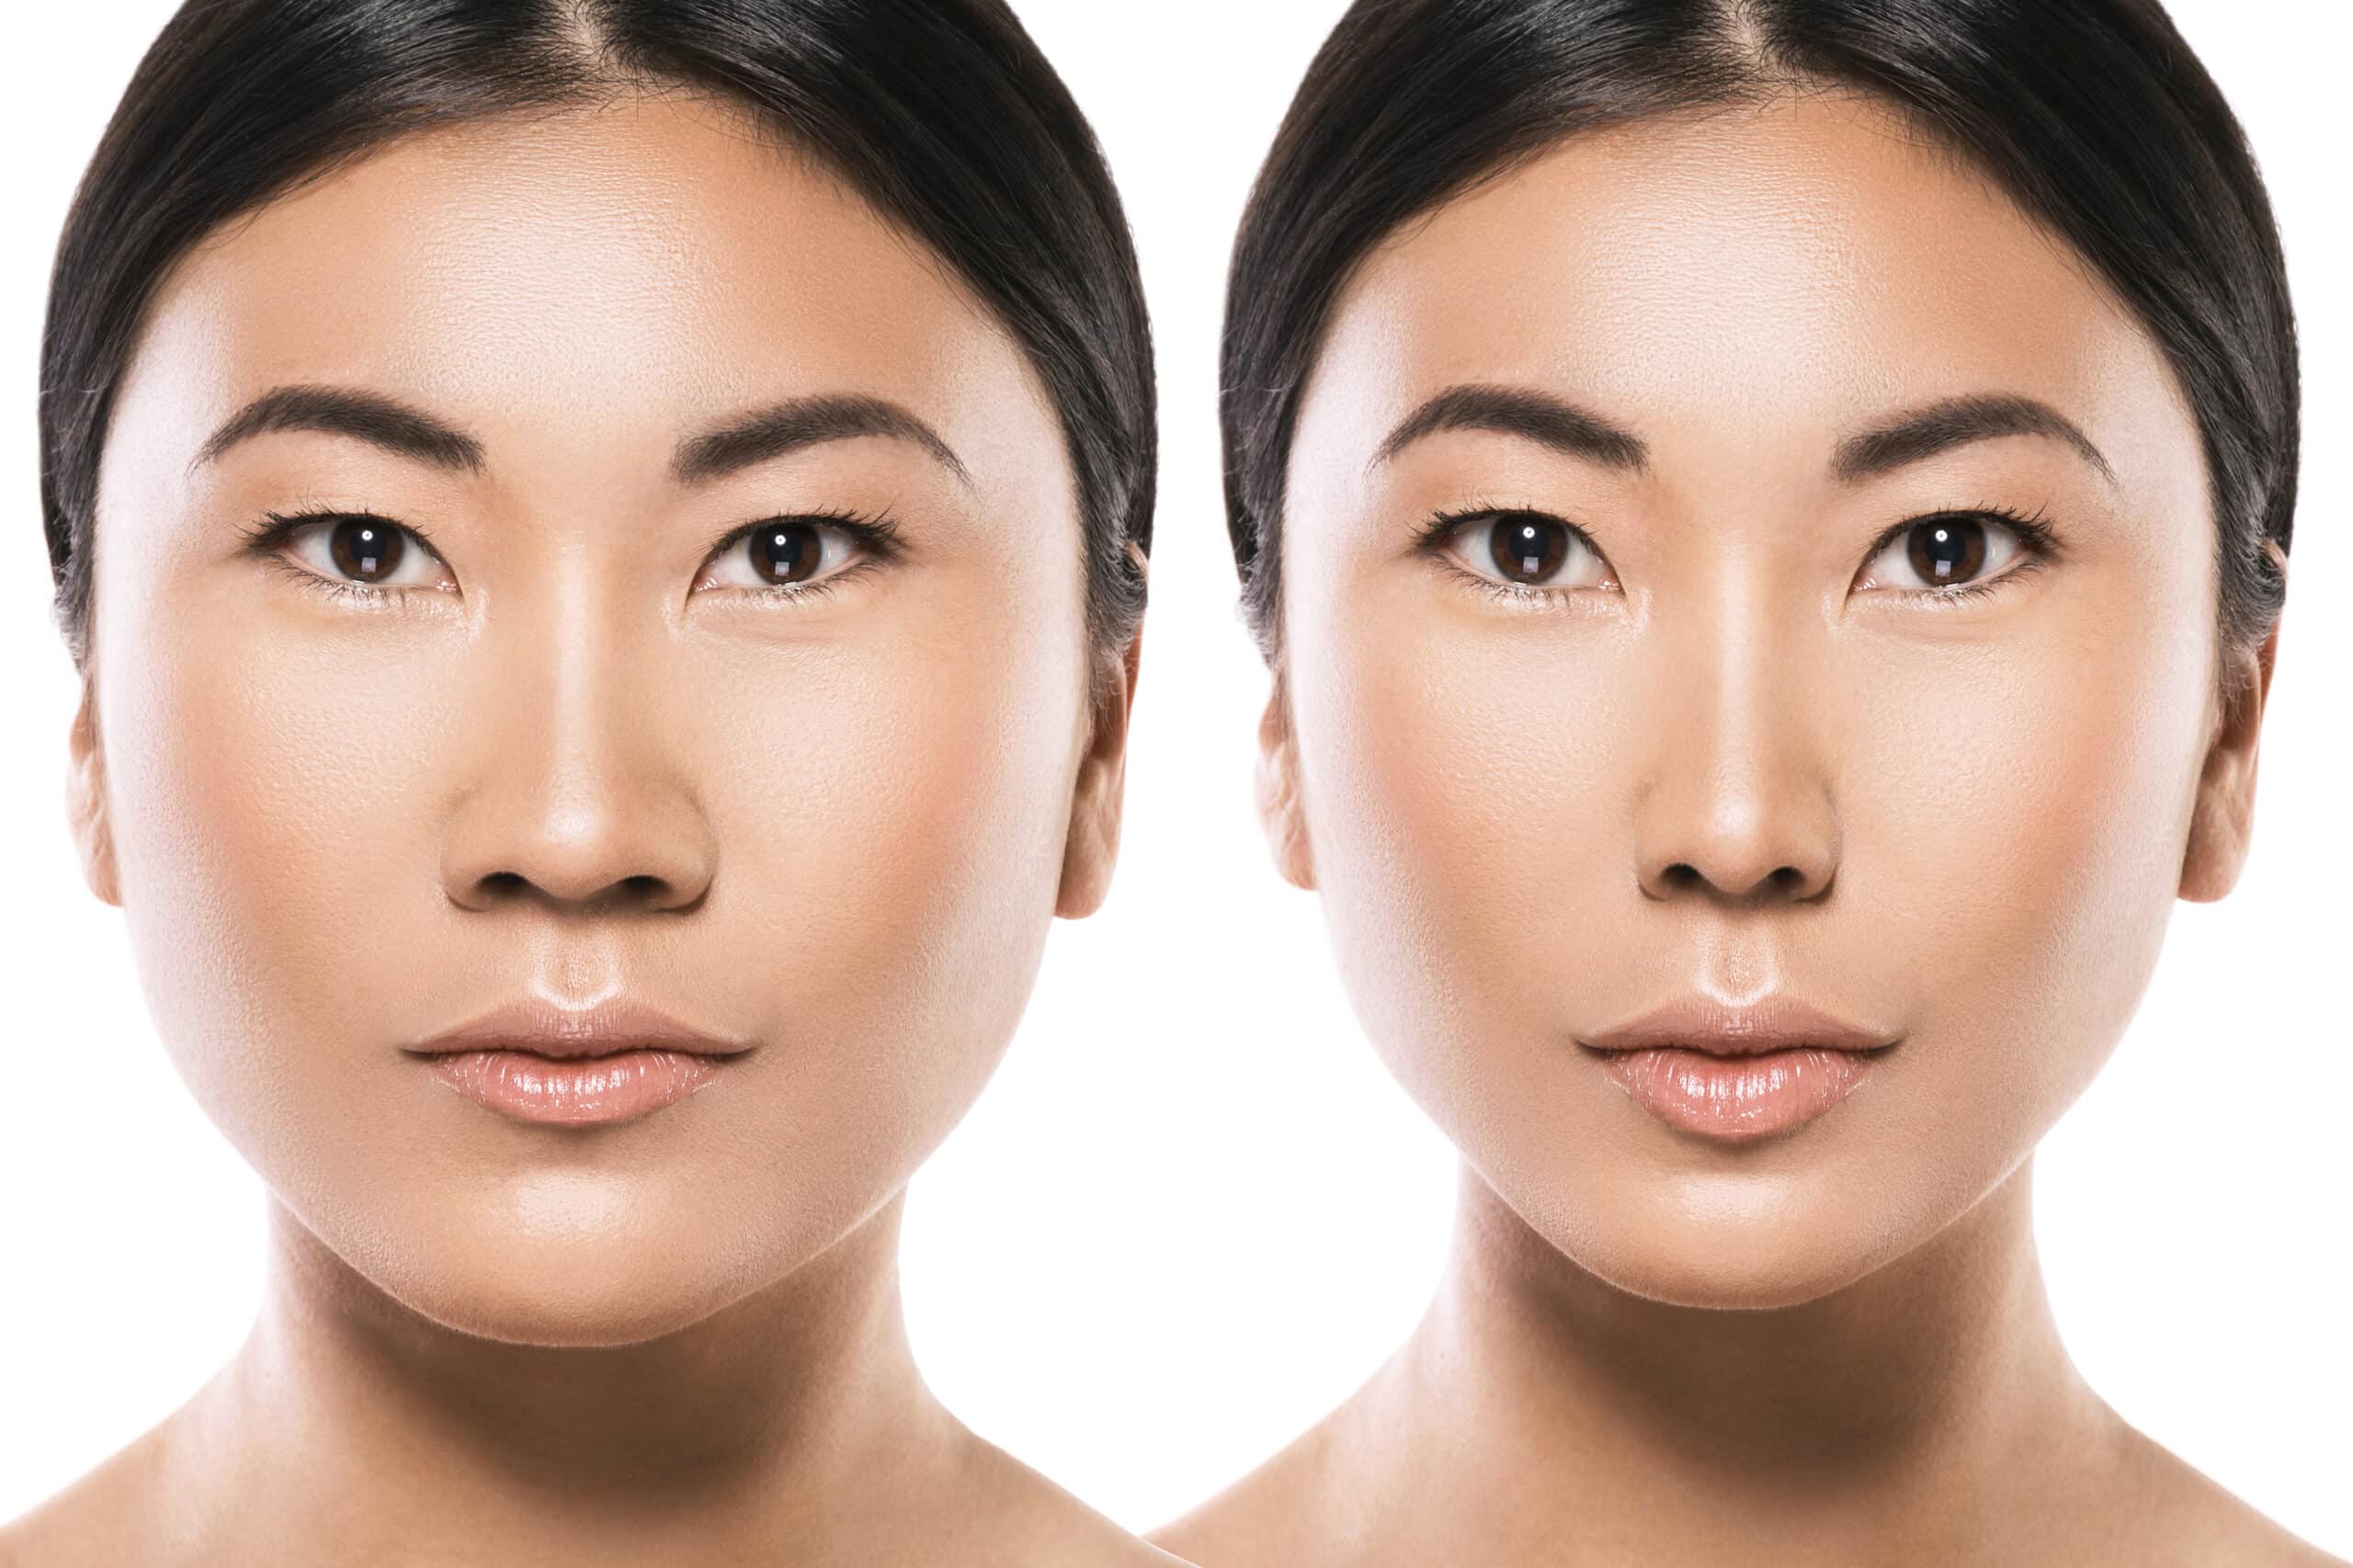 Before and After Derma Fillers